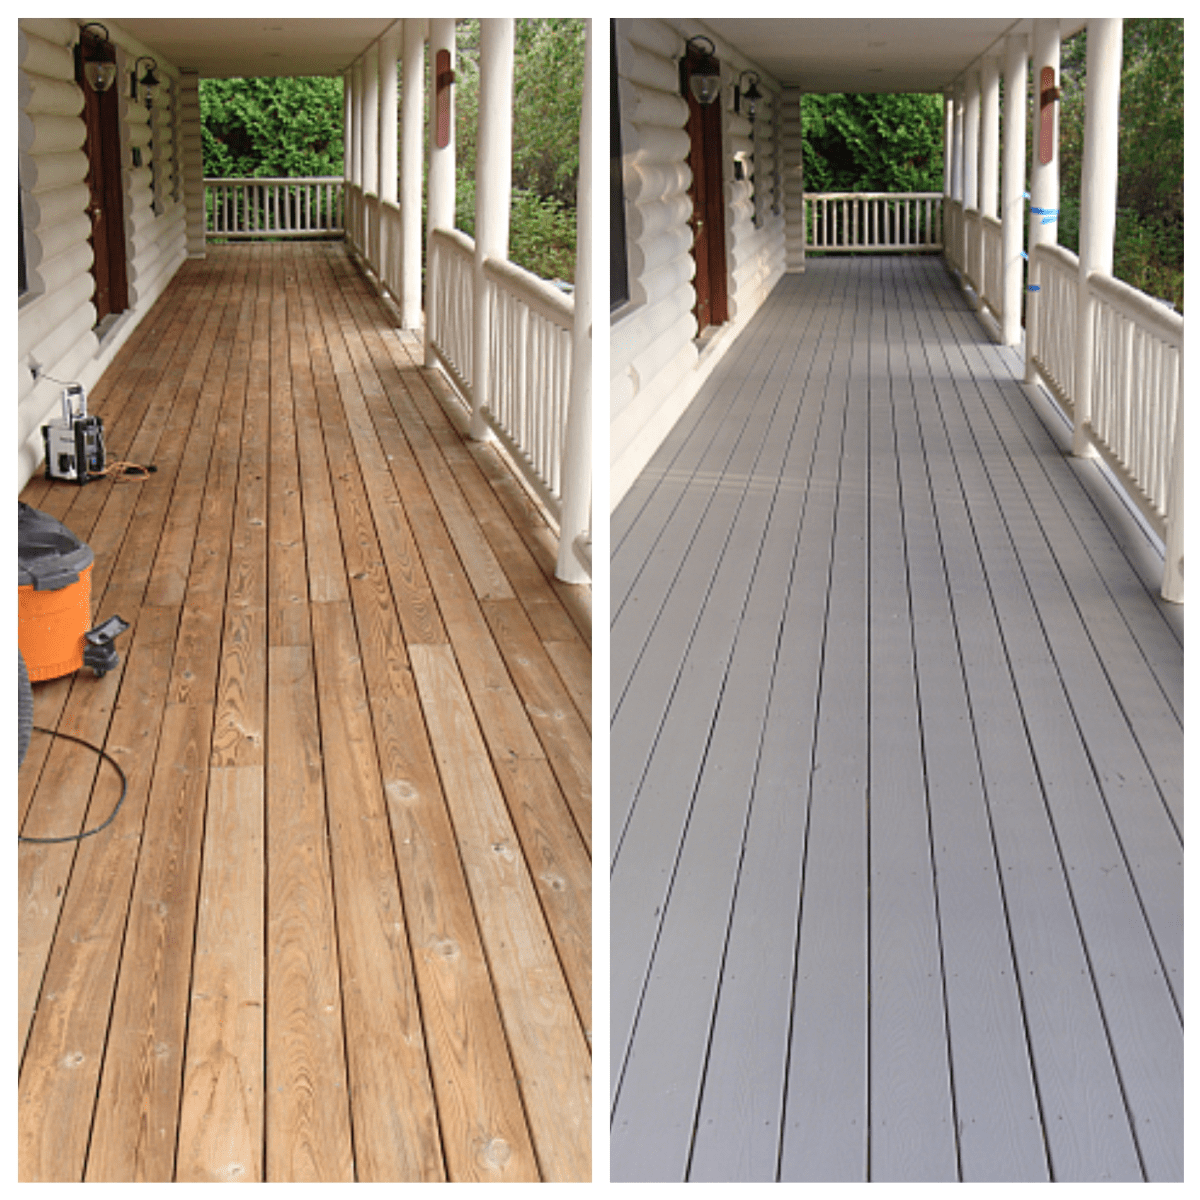 Tips For Painting A Porch Floor Dengarden